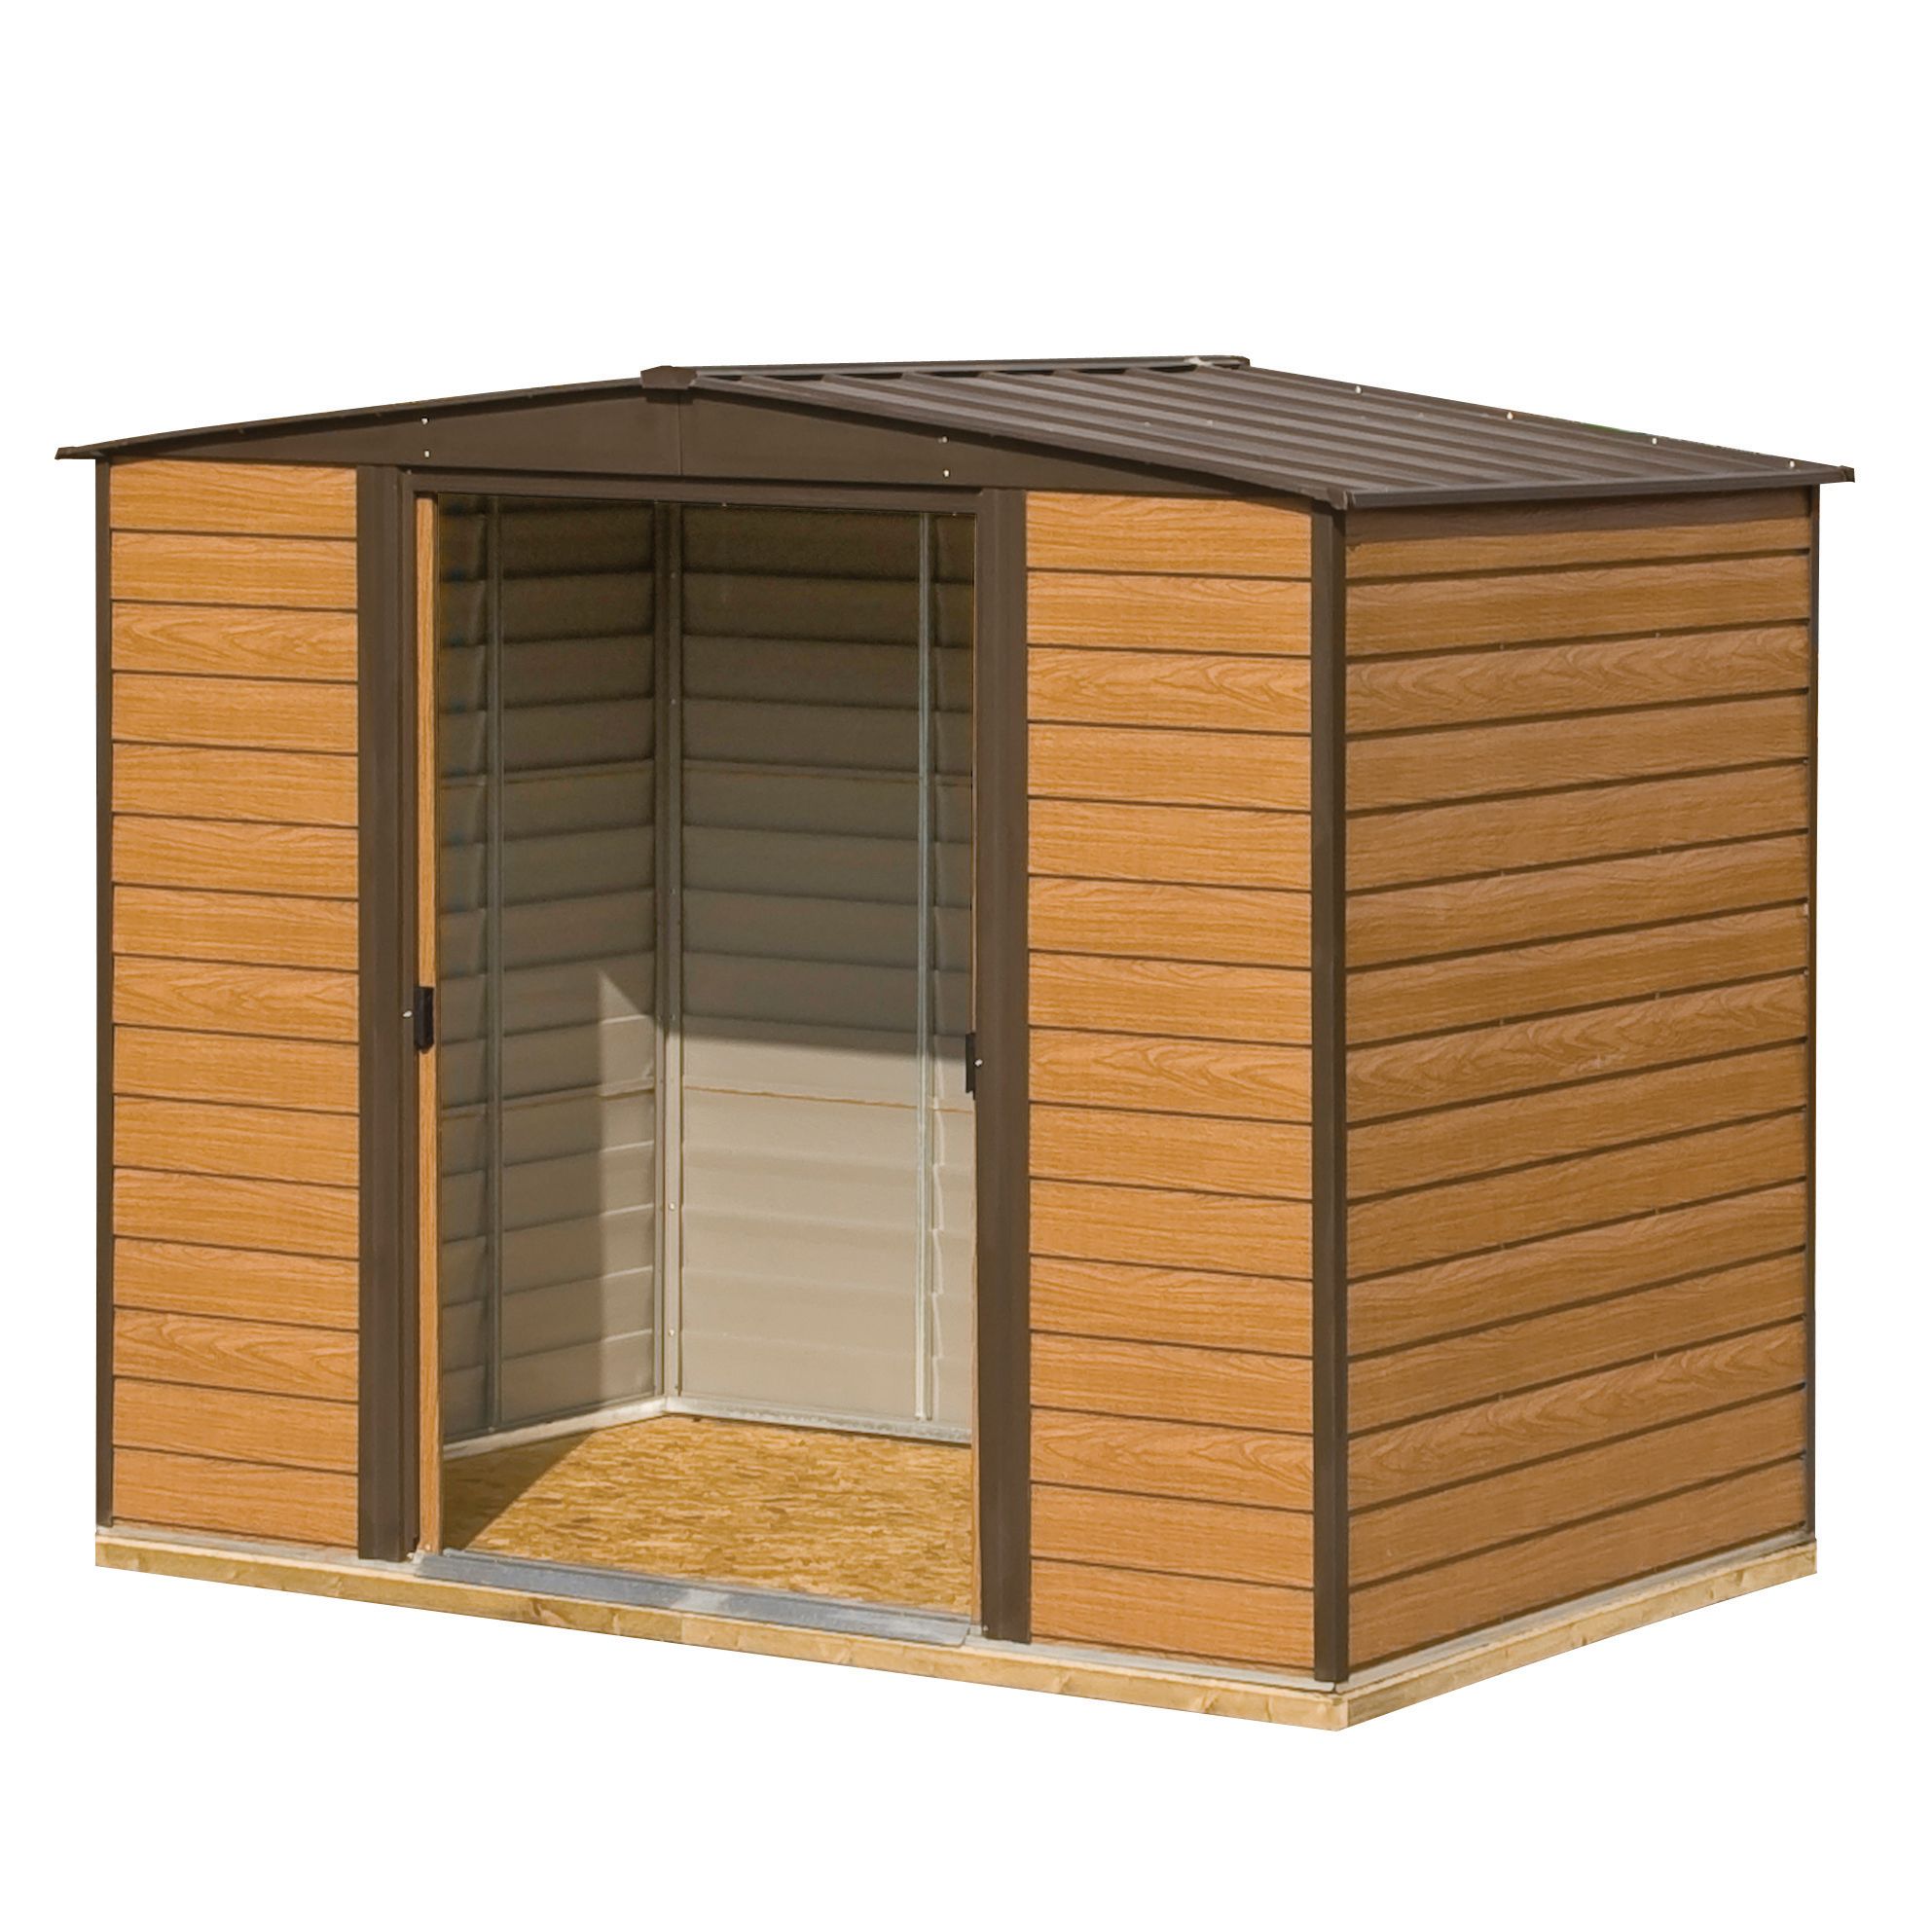 Image of Rowlinson Woodvale 8 x 6ft Double Door Metal Apex Shed including Floor